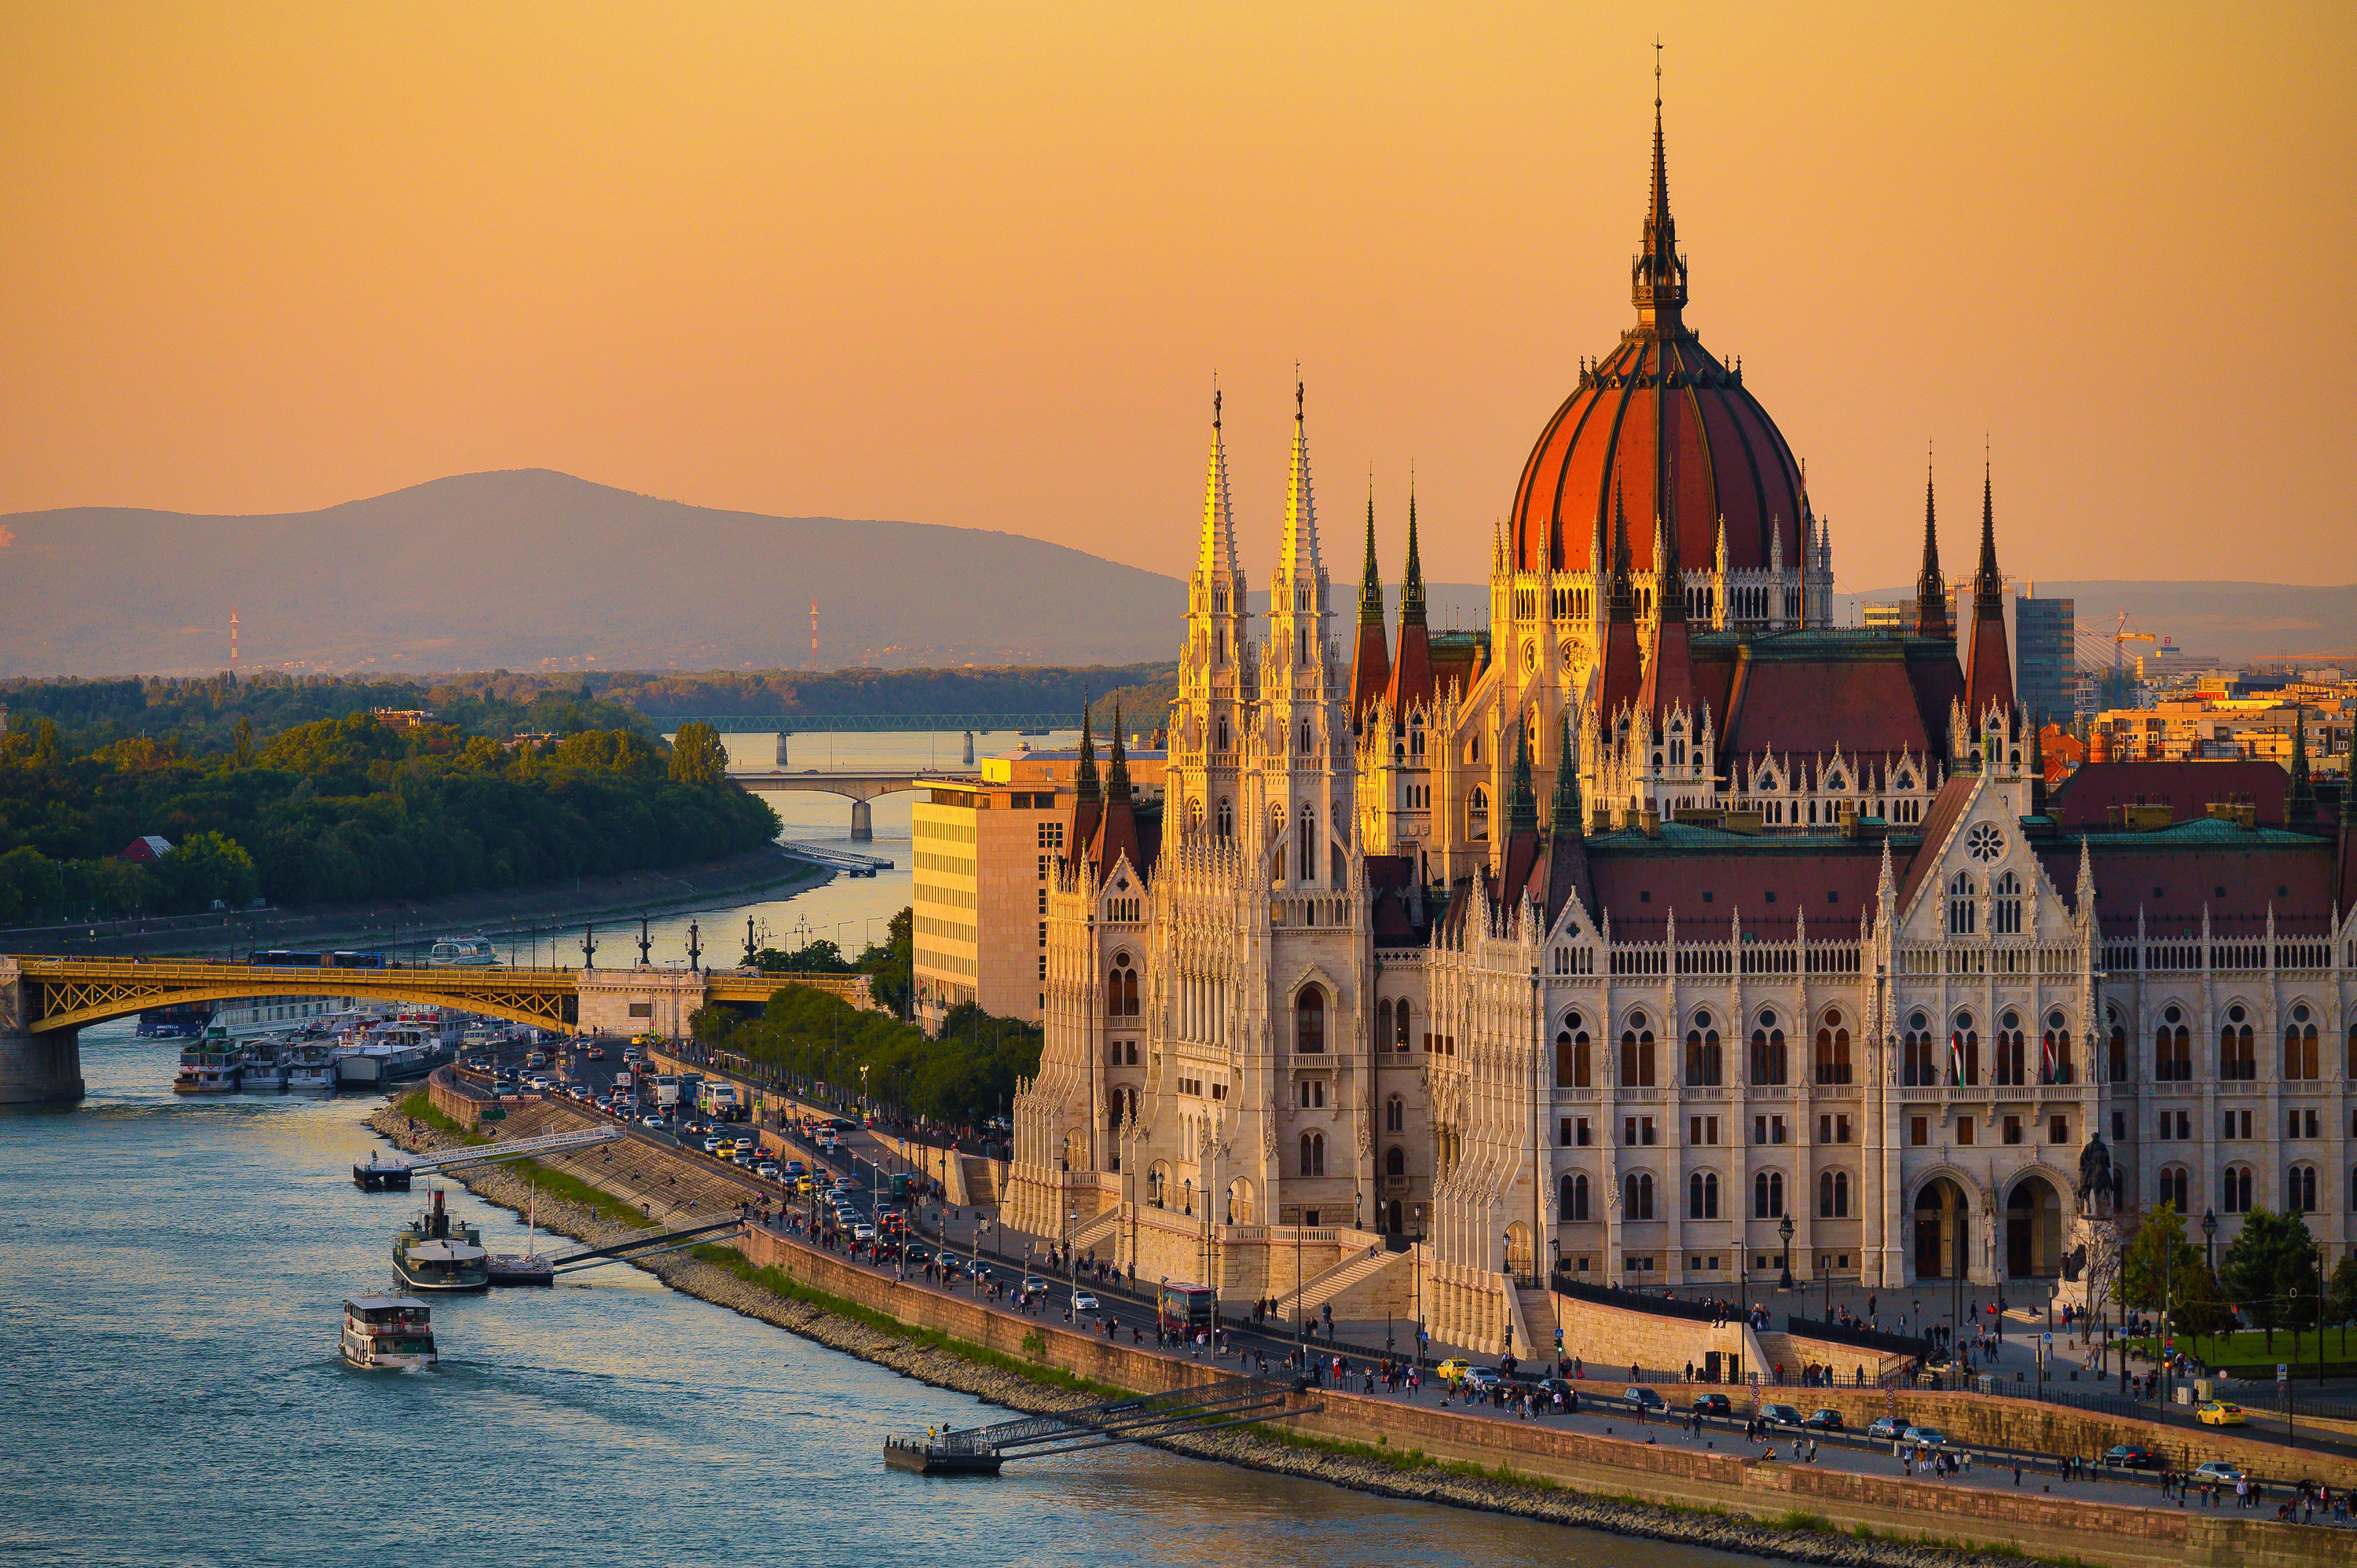 Sunset Scene of The Hungarian Parliament, the Chains Bridge and Danube Rive, Budapest, Hungary